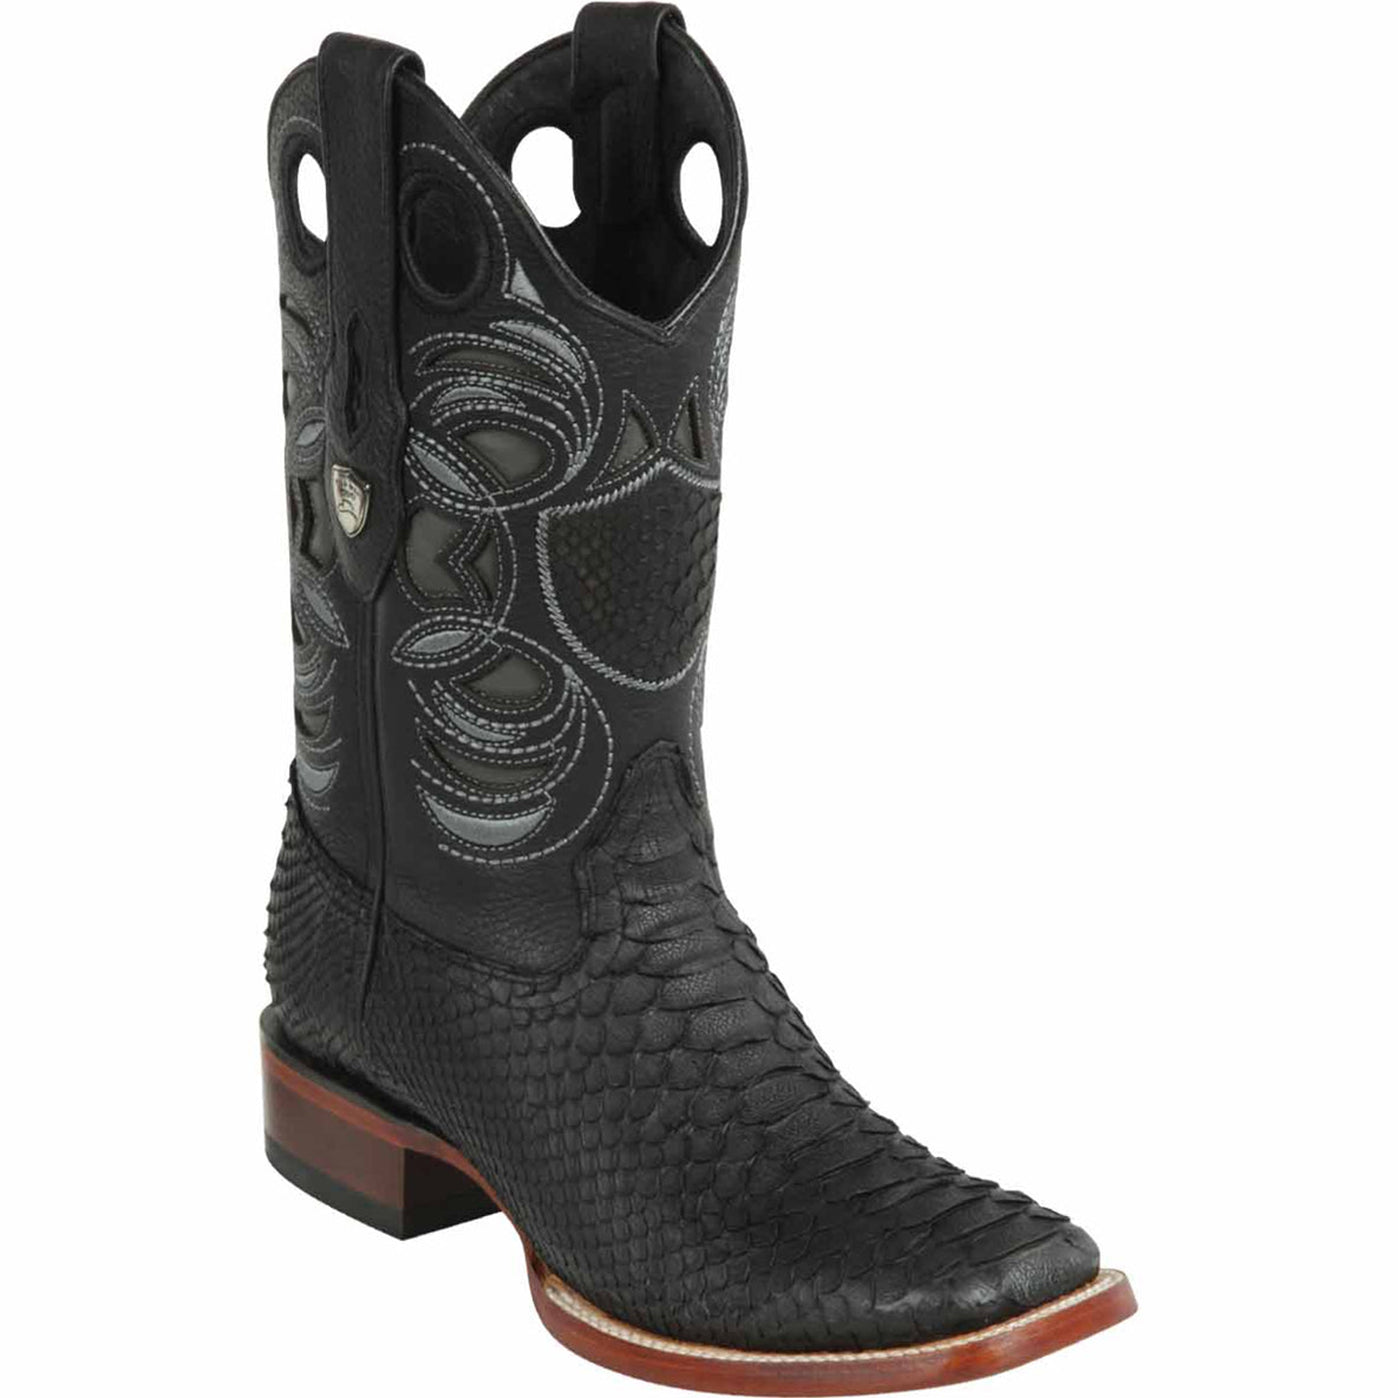 Python Snake Boots Mens Square Toe - Wild West Boots